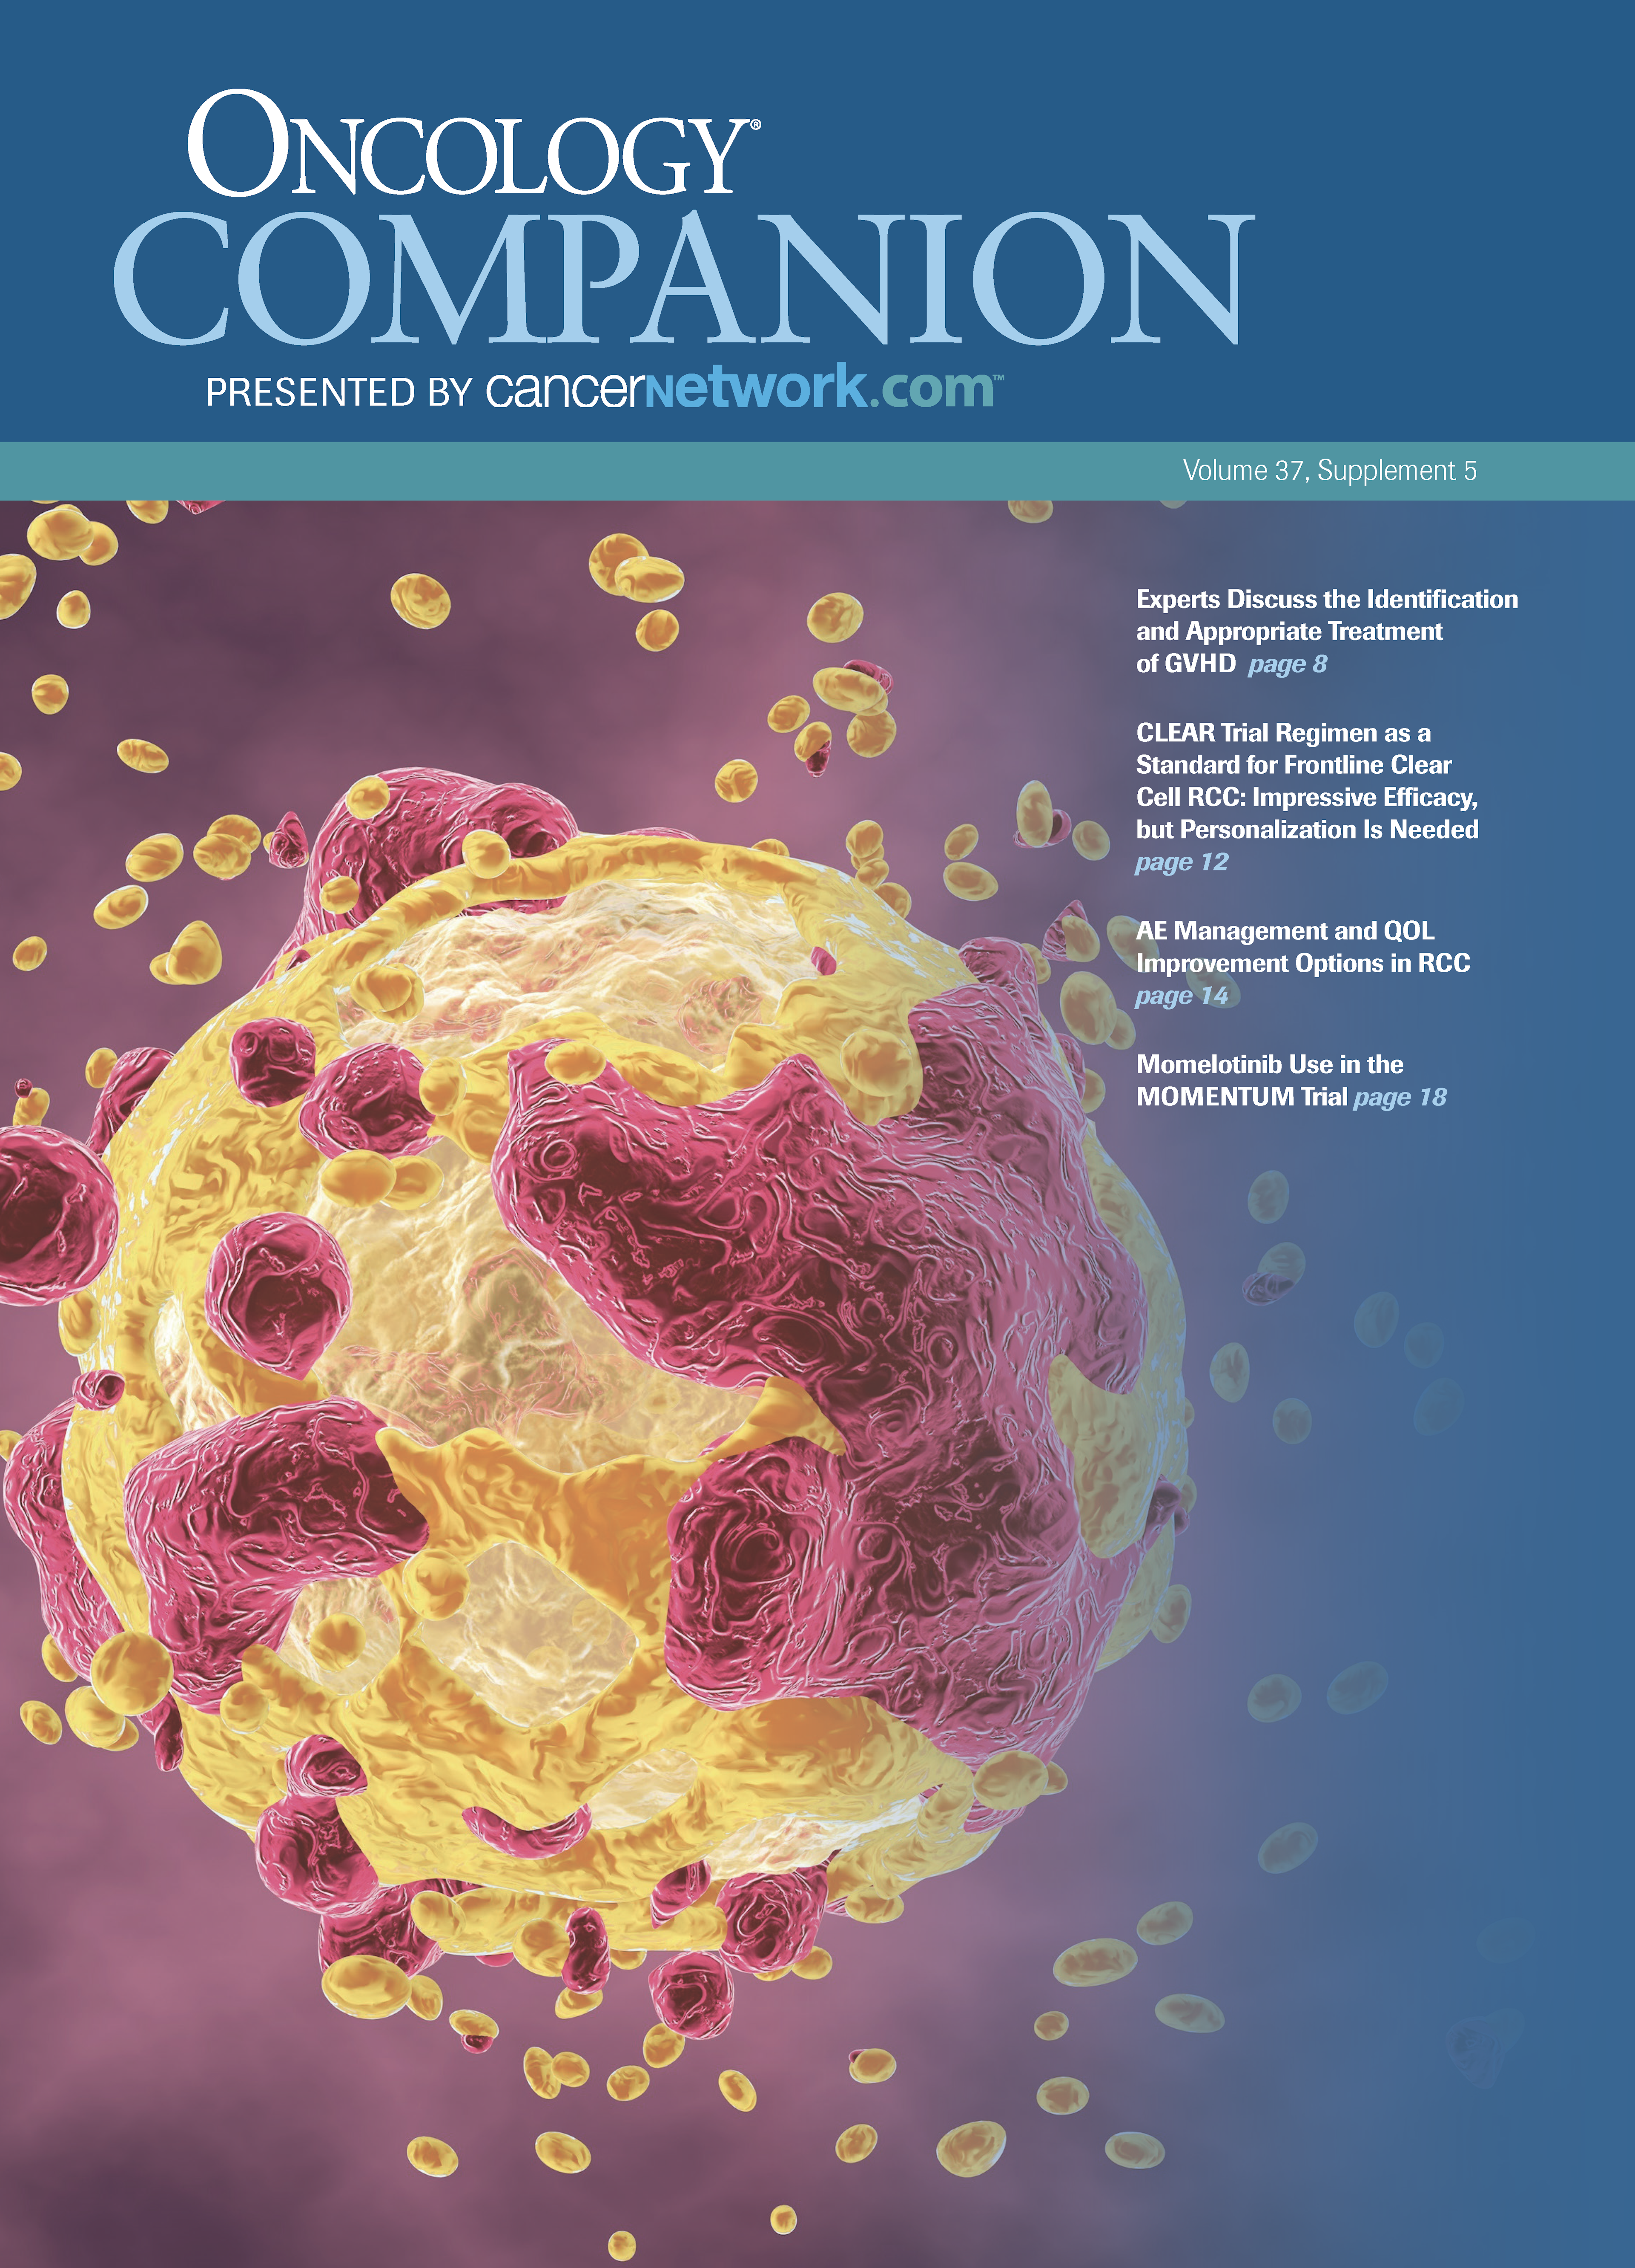 ONCOLOGY® Companion, Volume 37, Supplement 5